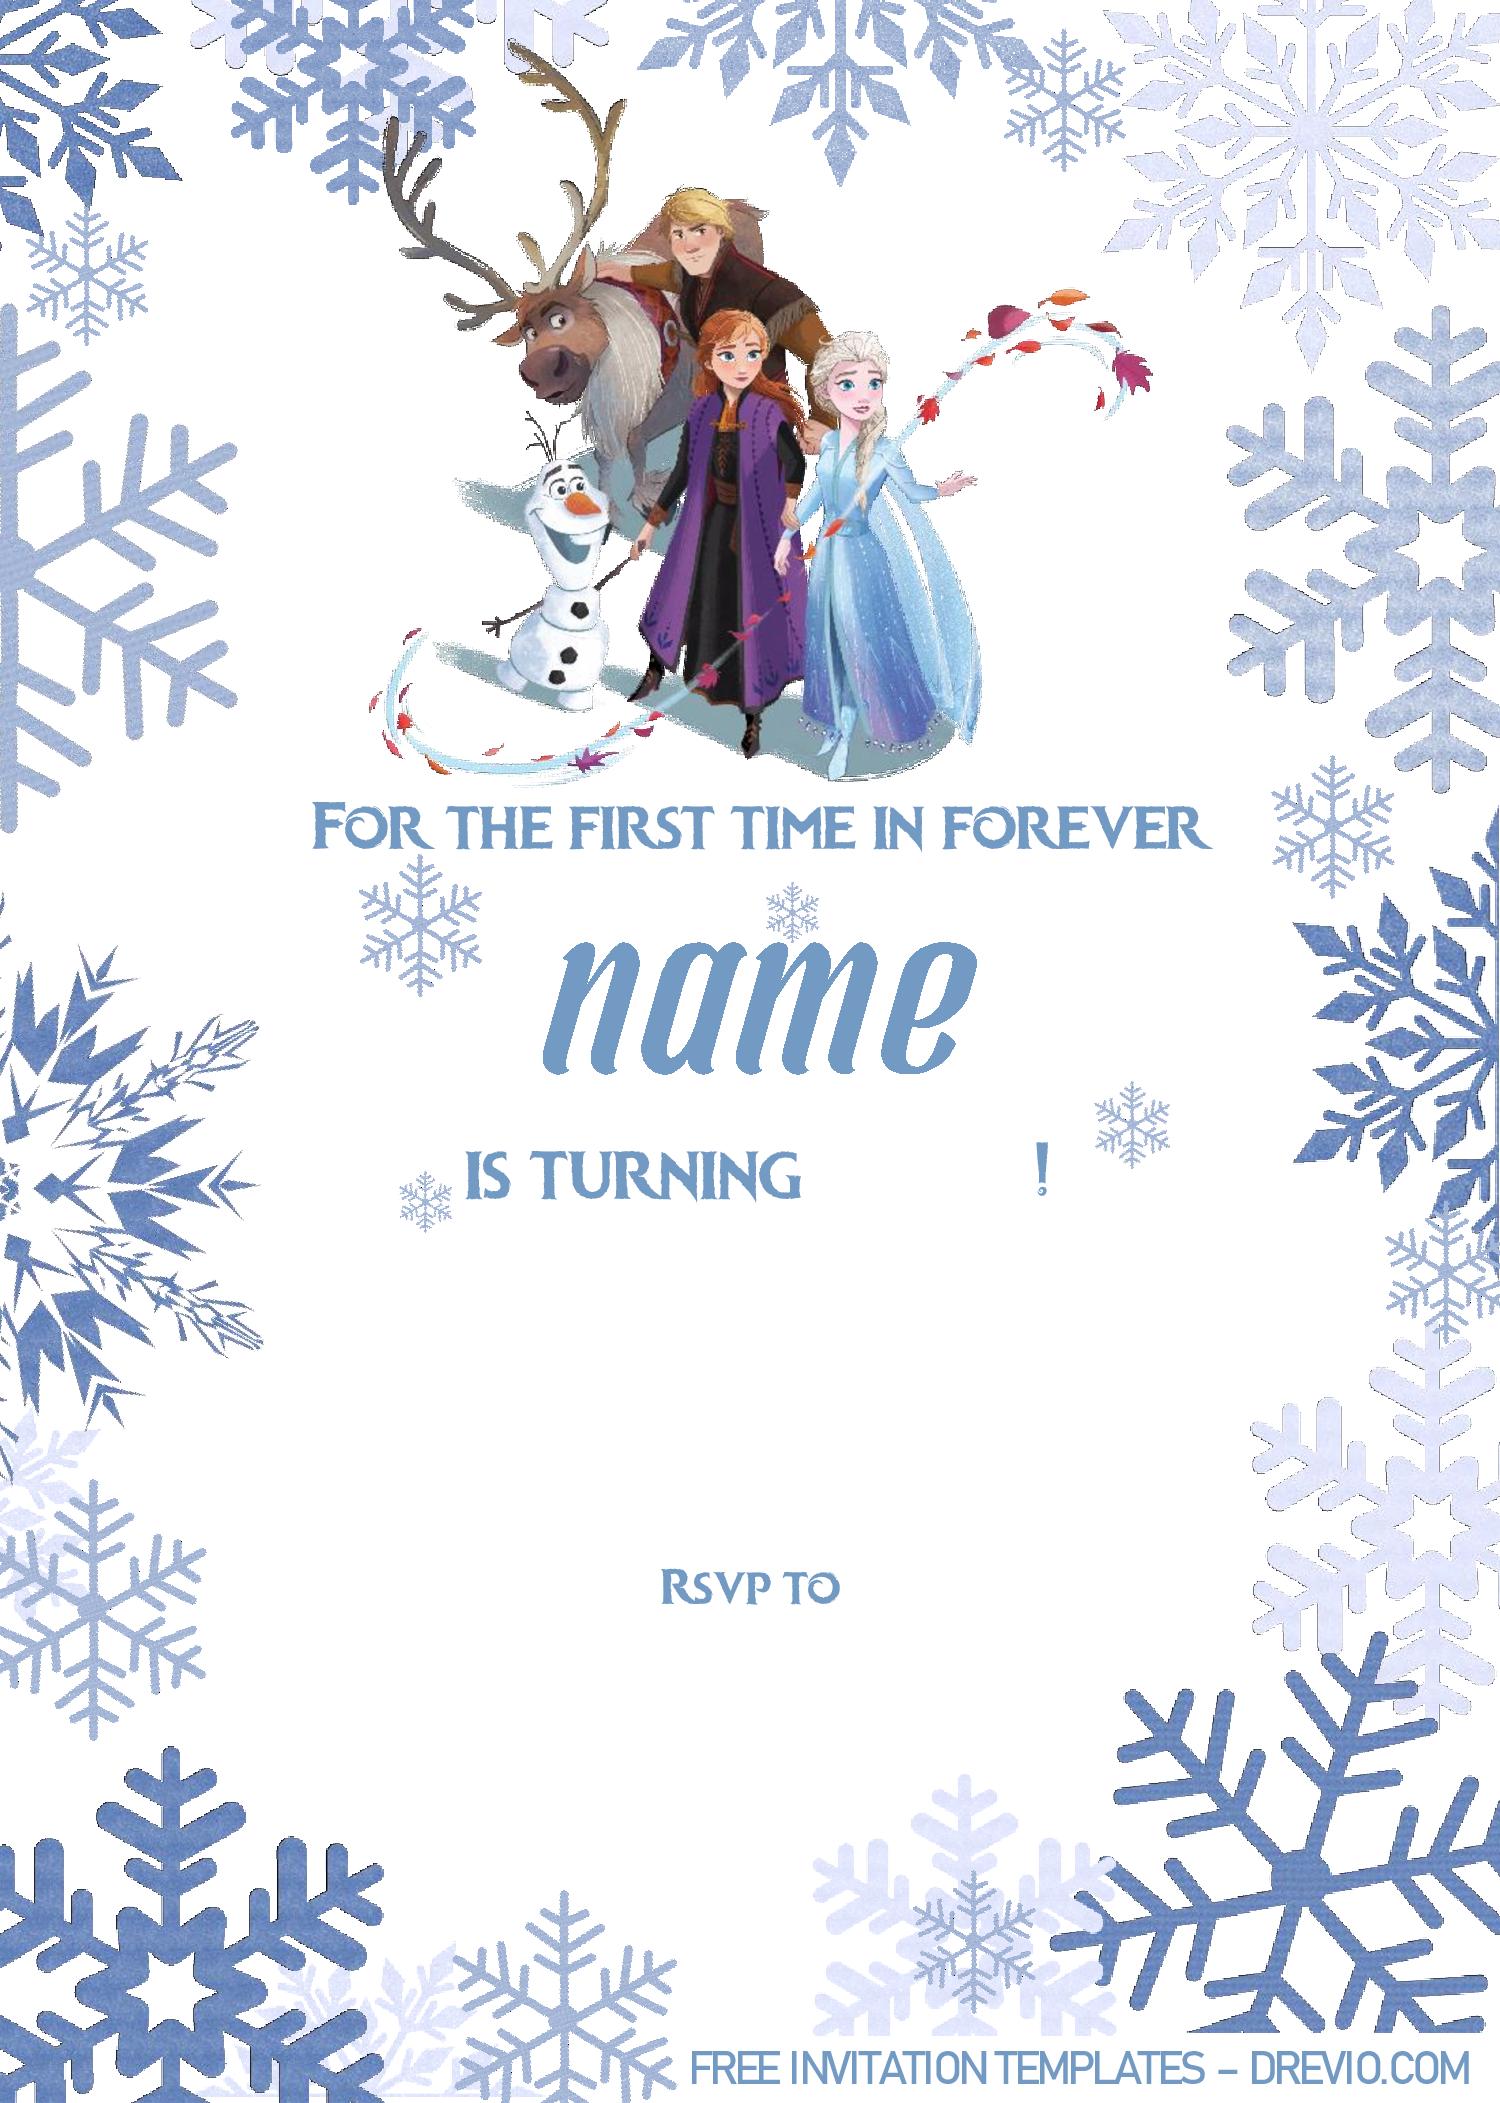 frozen-invitation-templates-editable-with-ms-word-download-hundreds